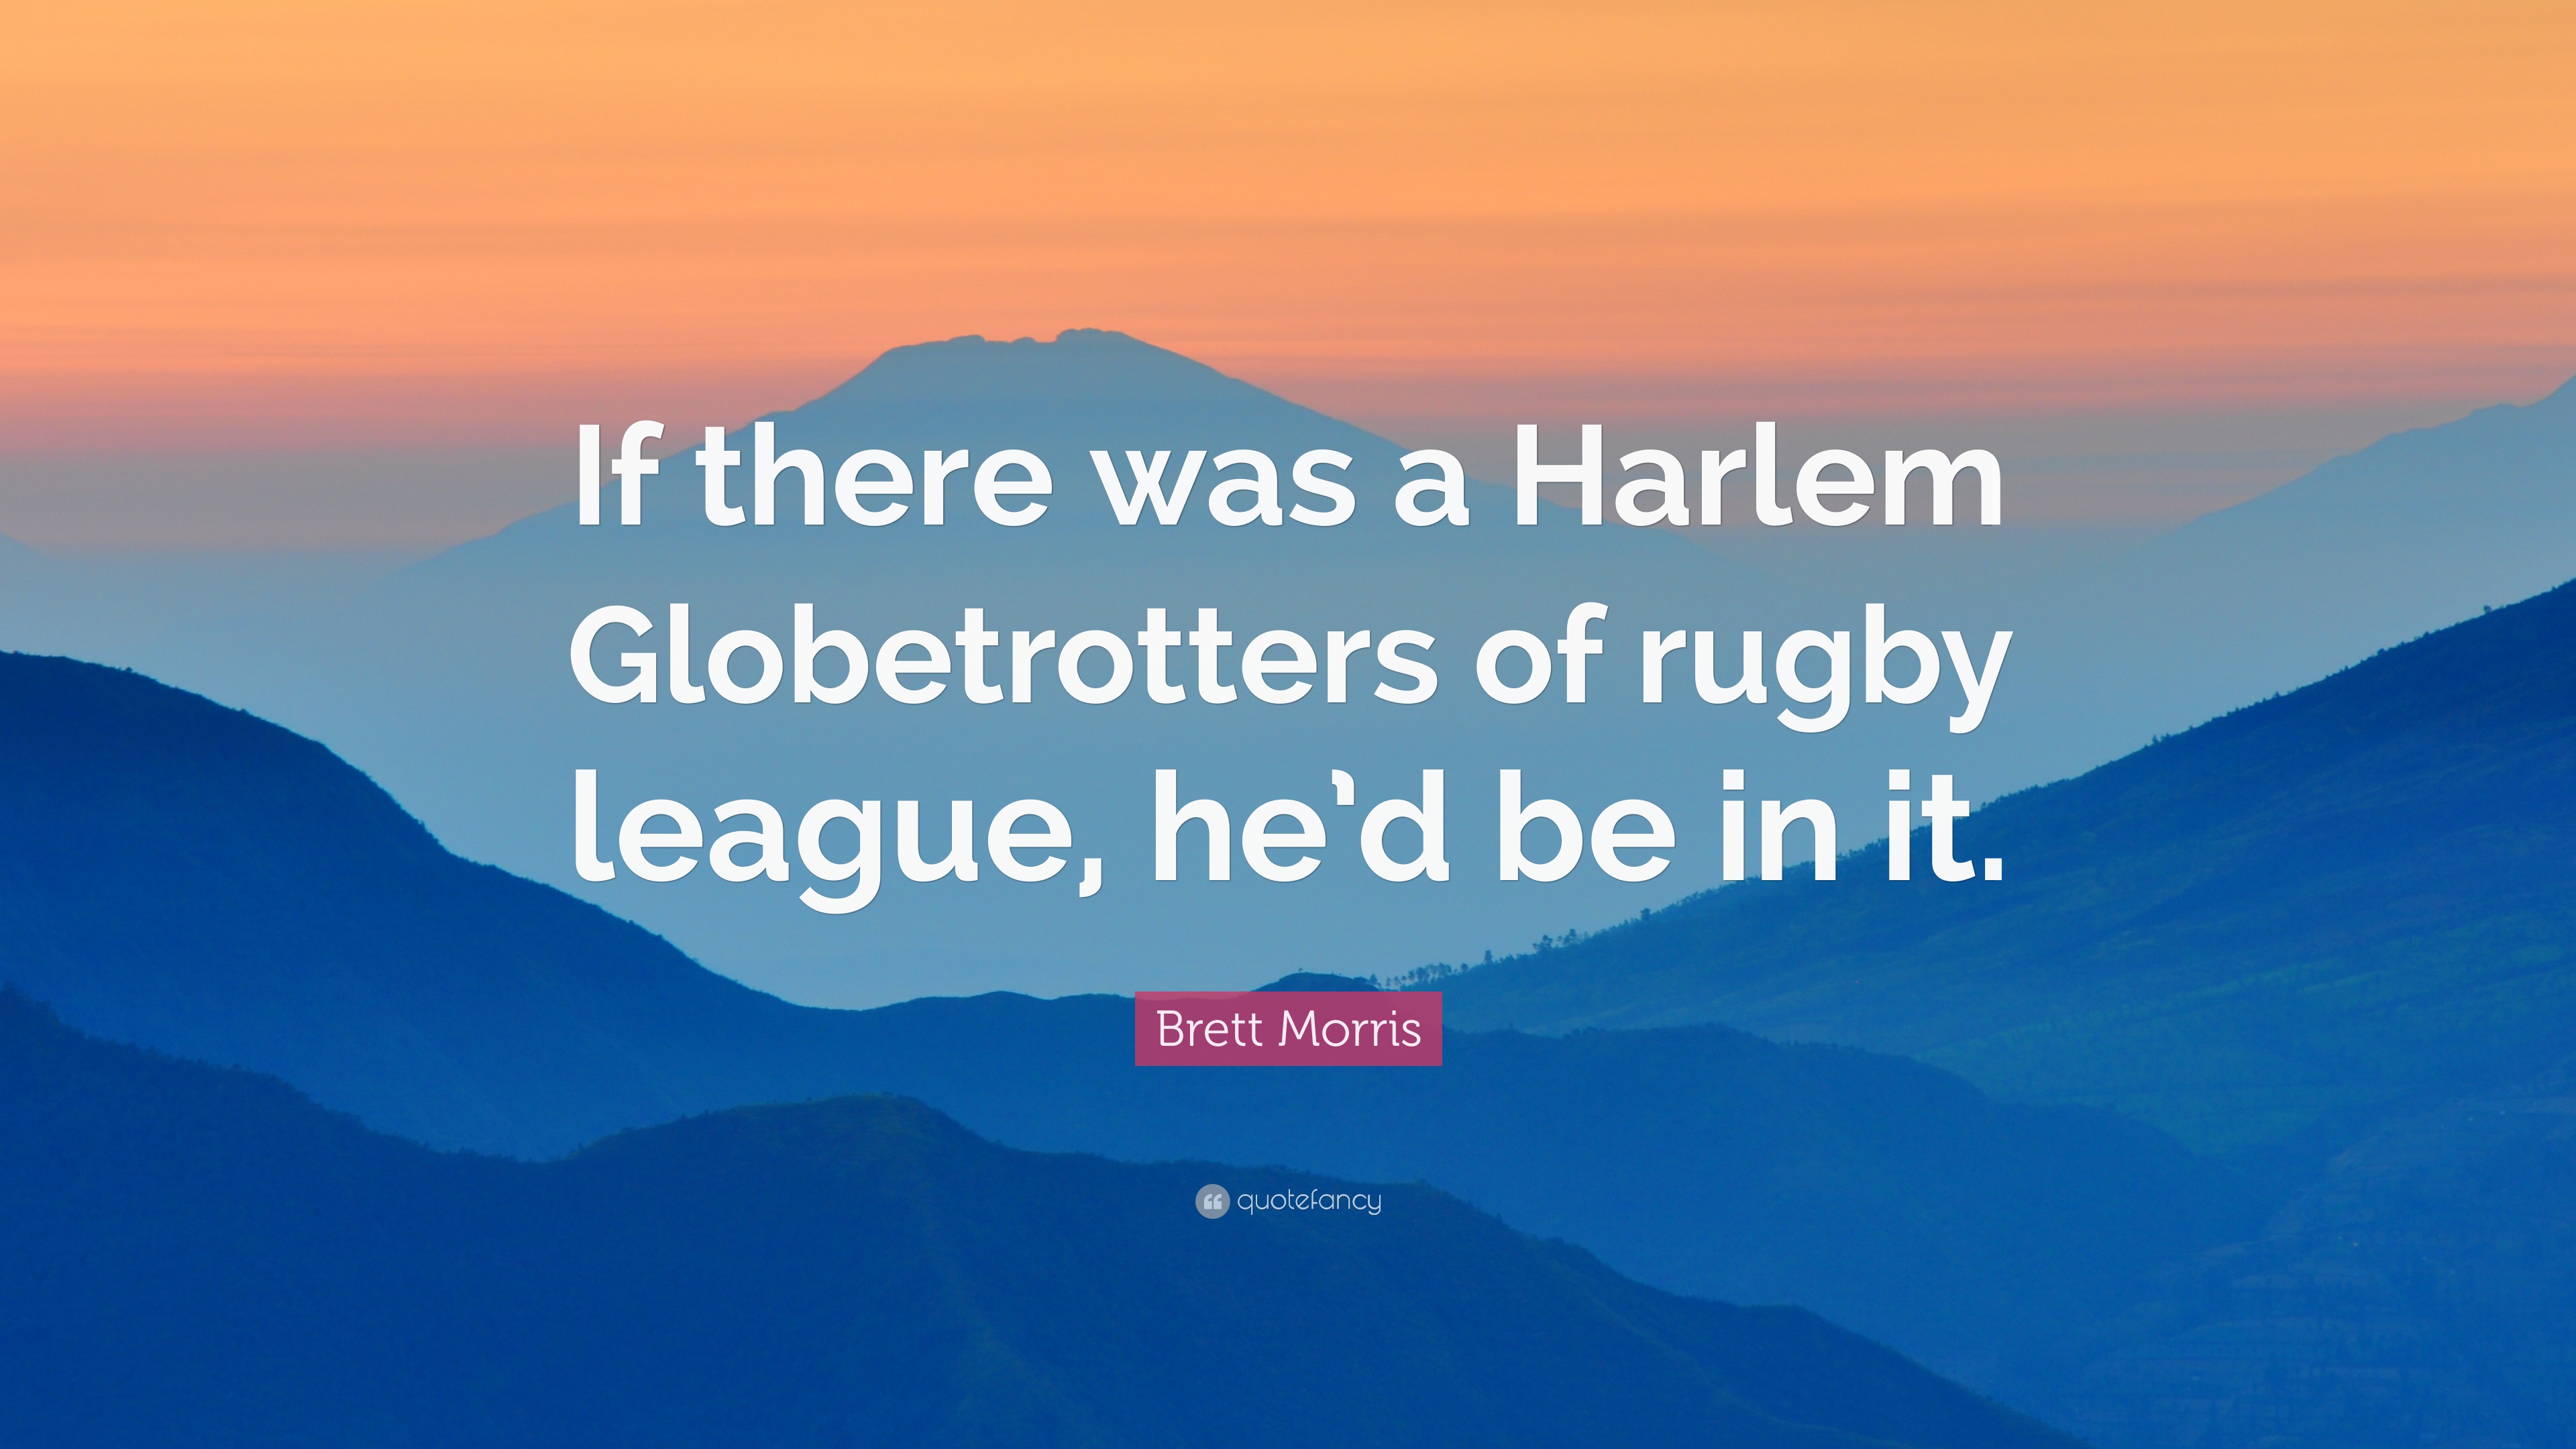 Brett Morris Quote: “If there was a Harlem Globetrotters of rugby